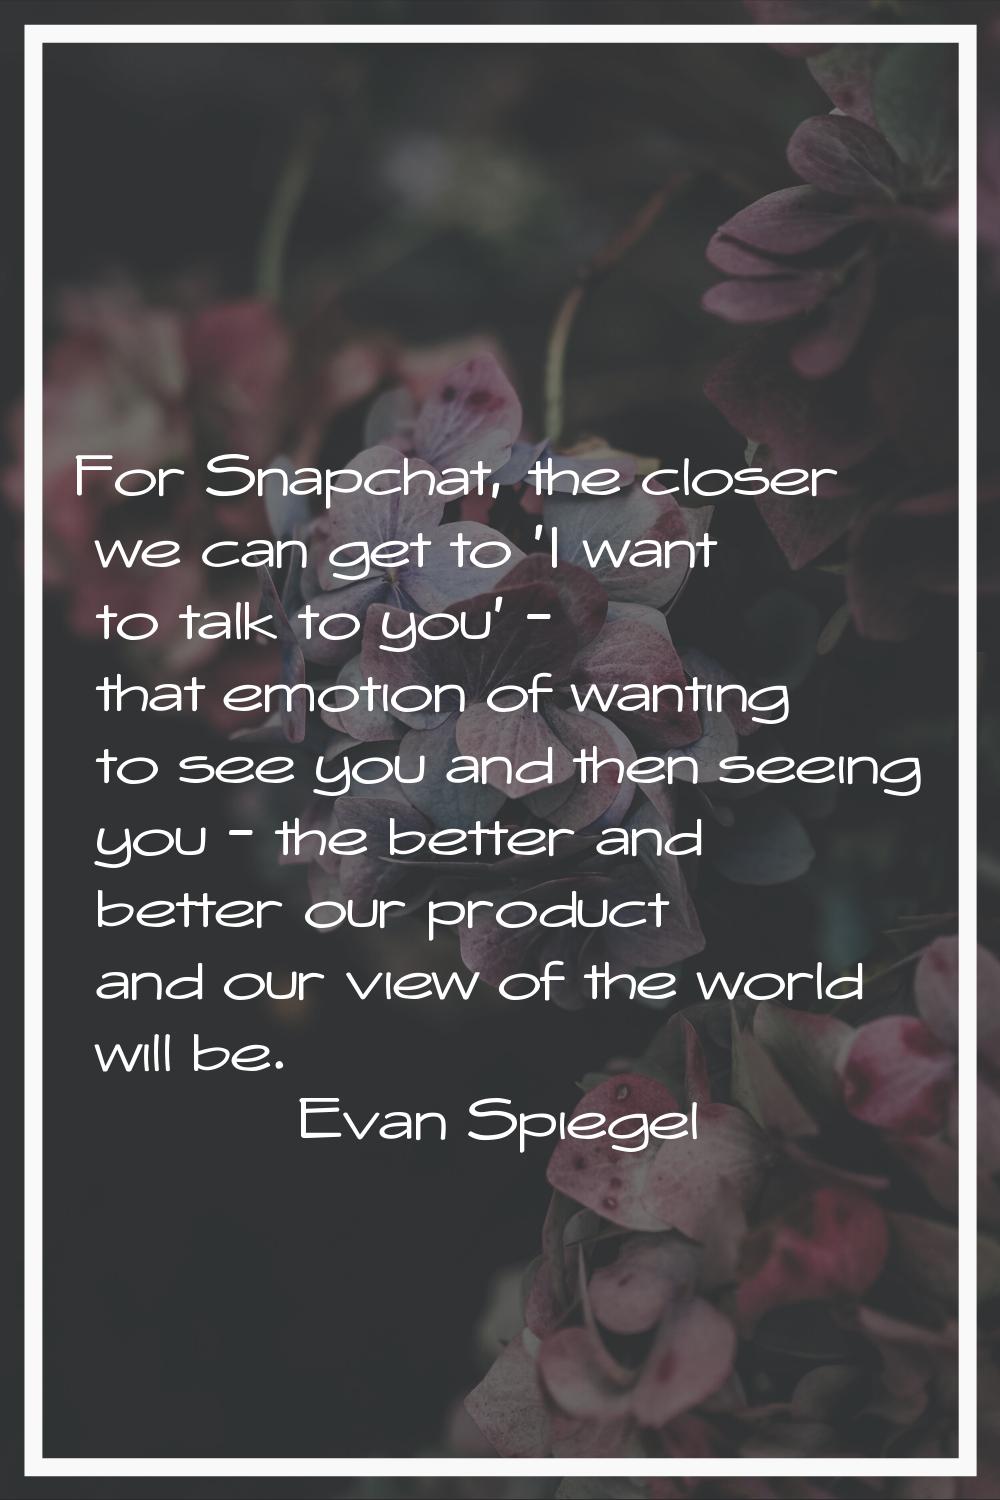 For Snapchat, the closer we can get to 'I want to talk to you' - that emotion of wanting to see you